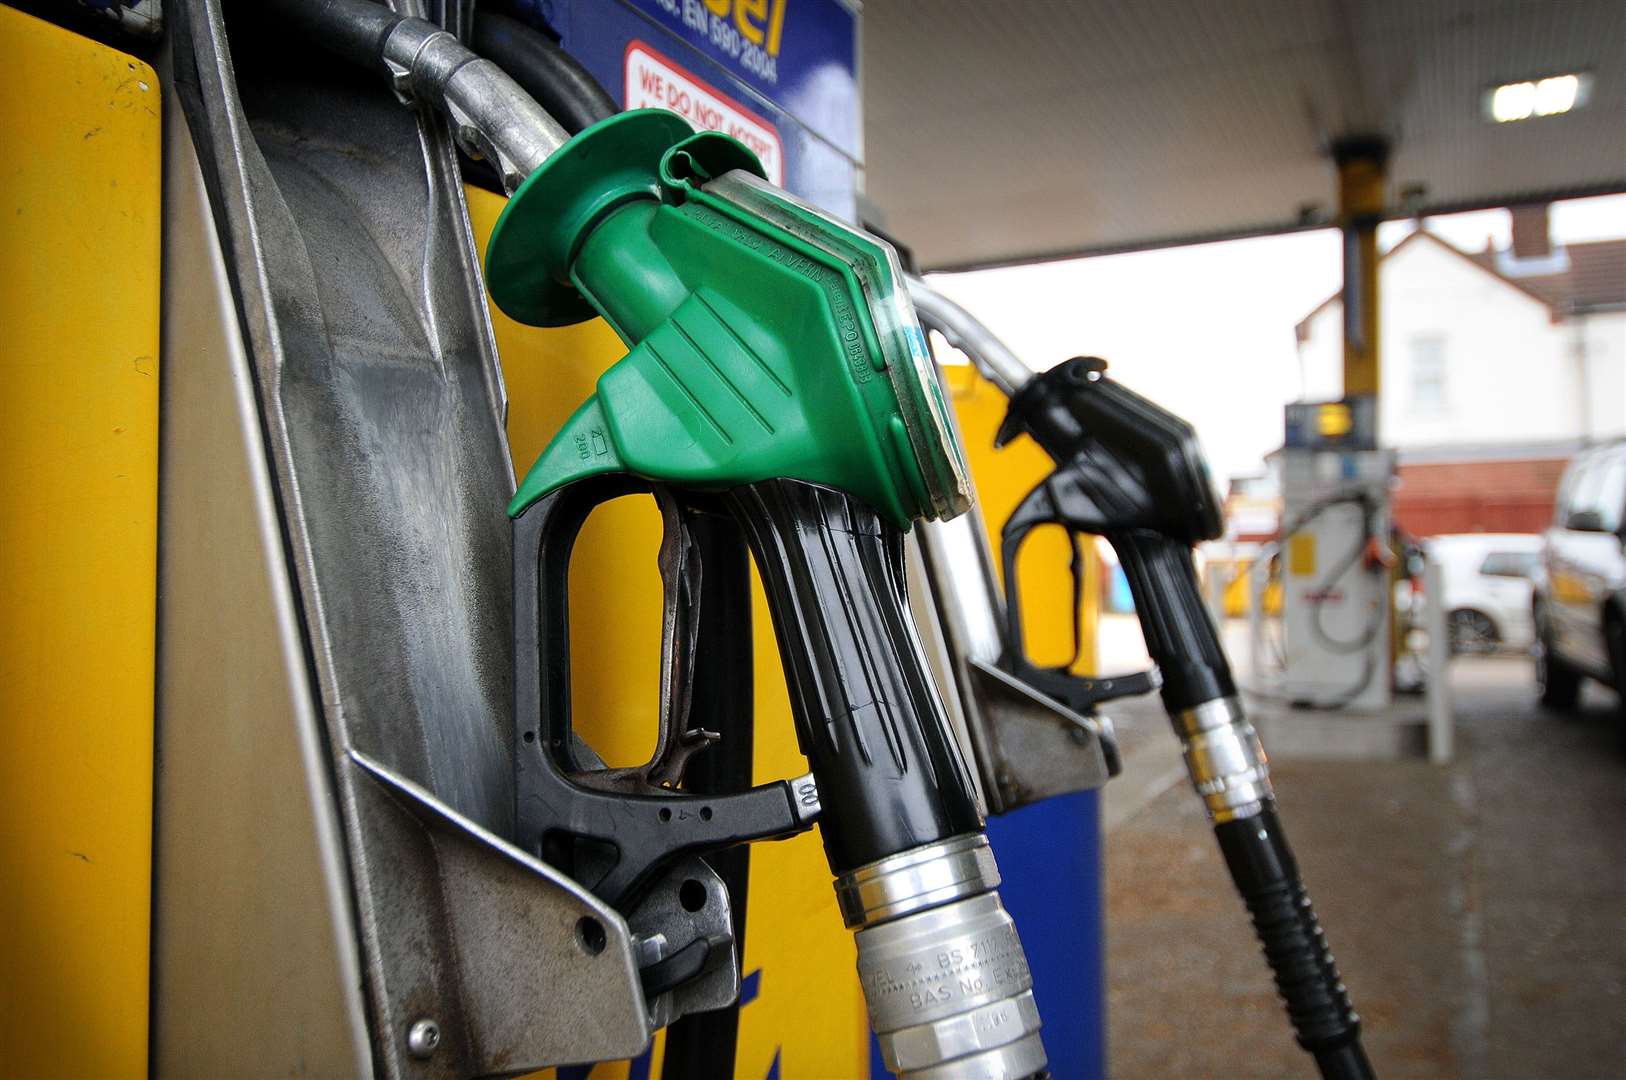 How can you make the petrol that you've bought last longer?